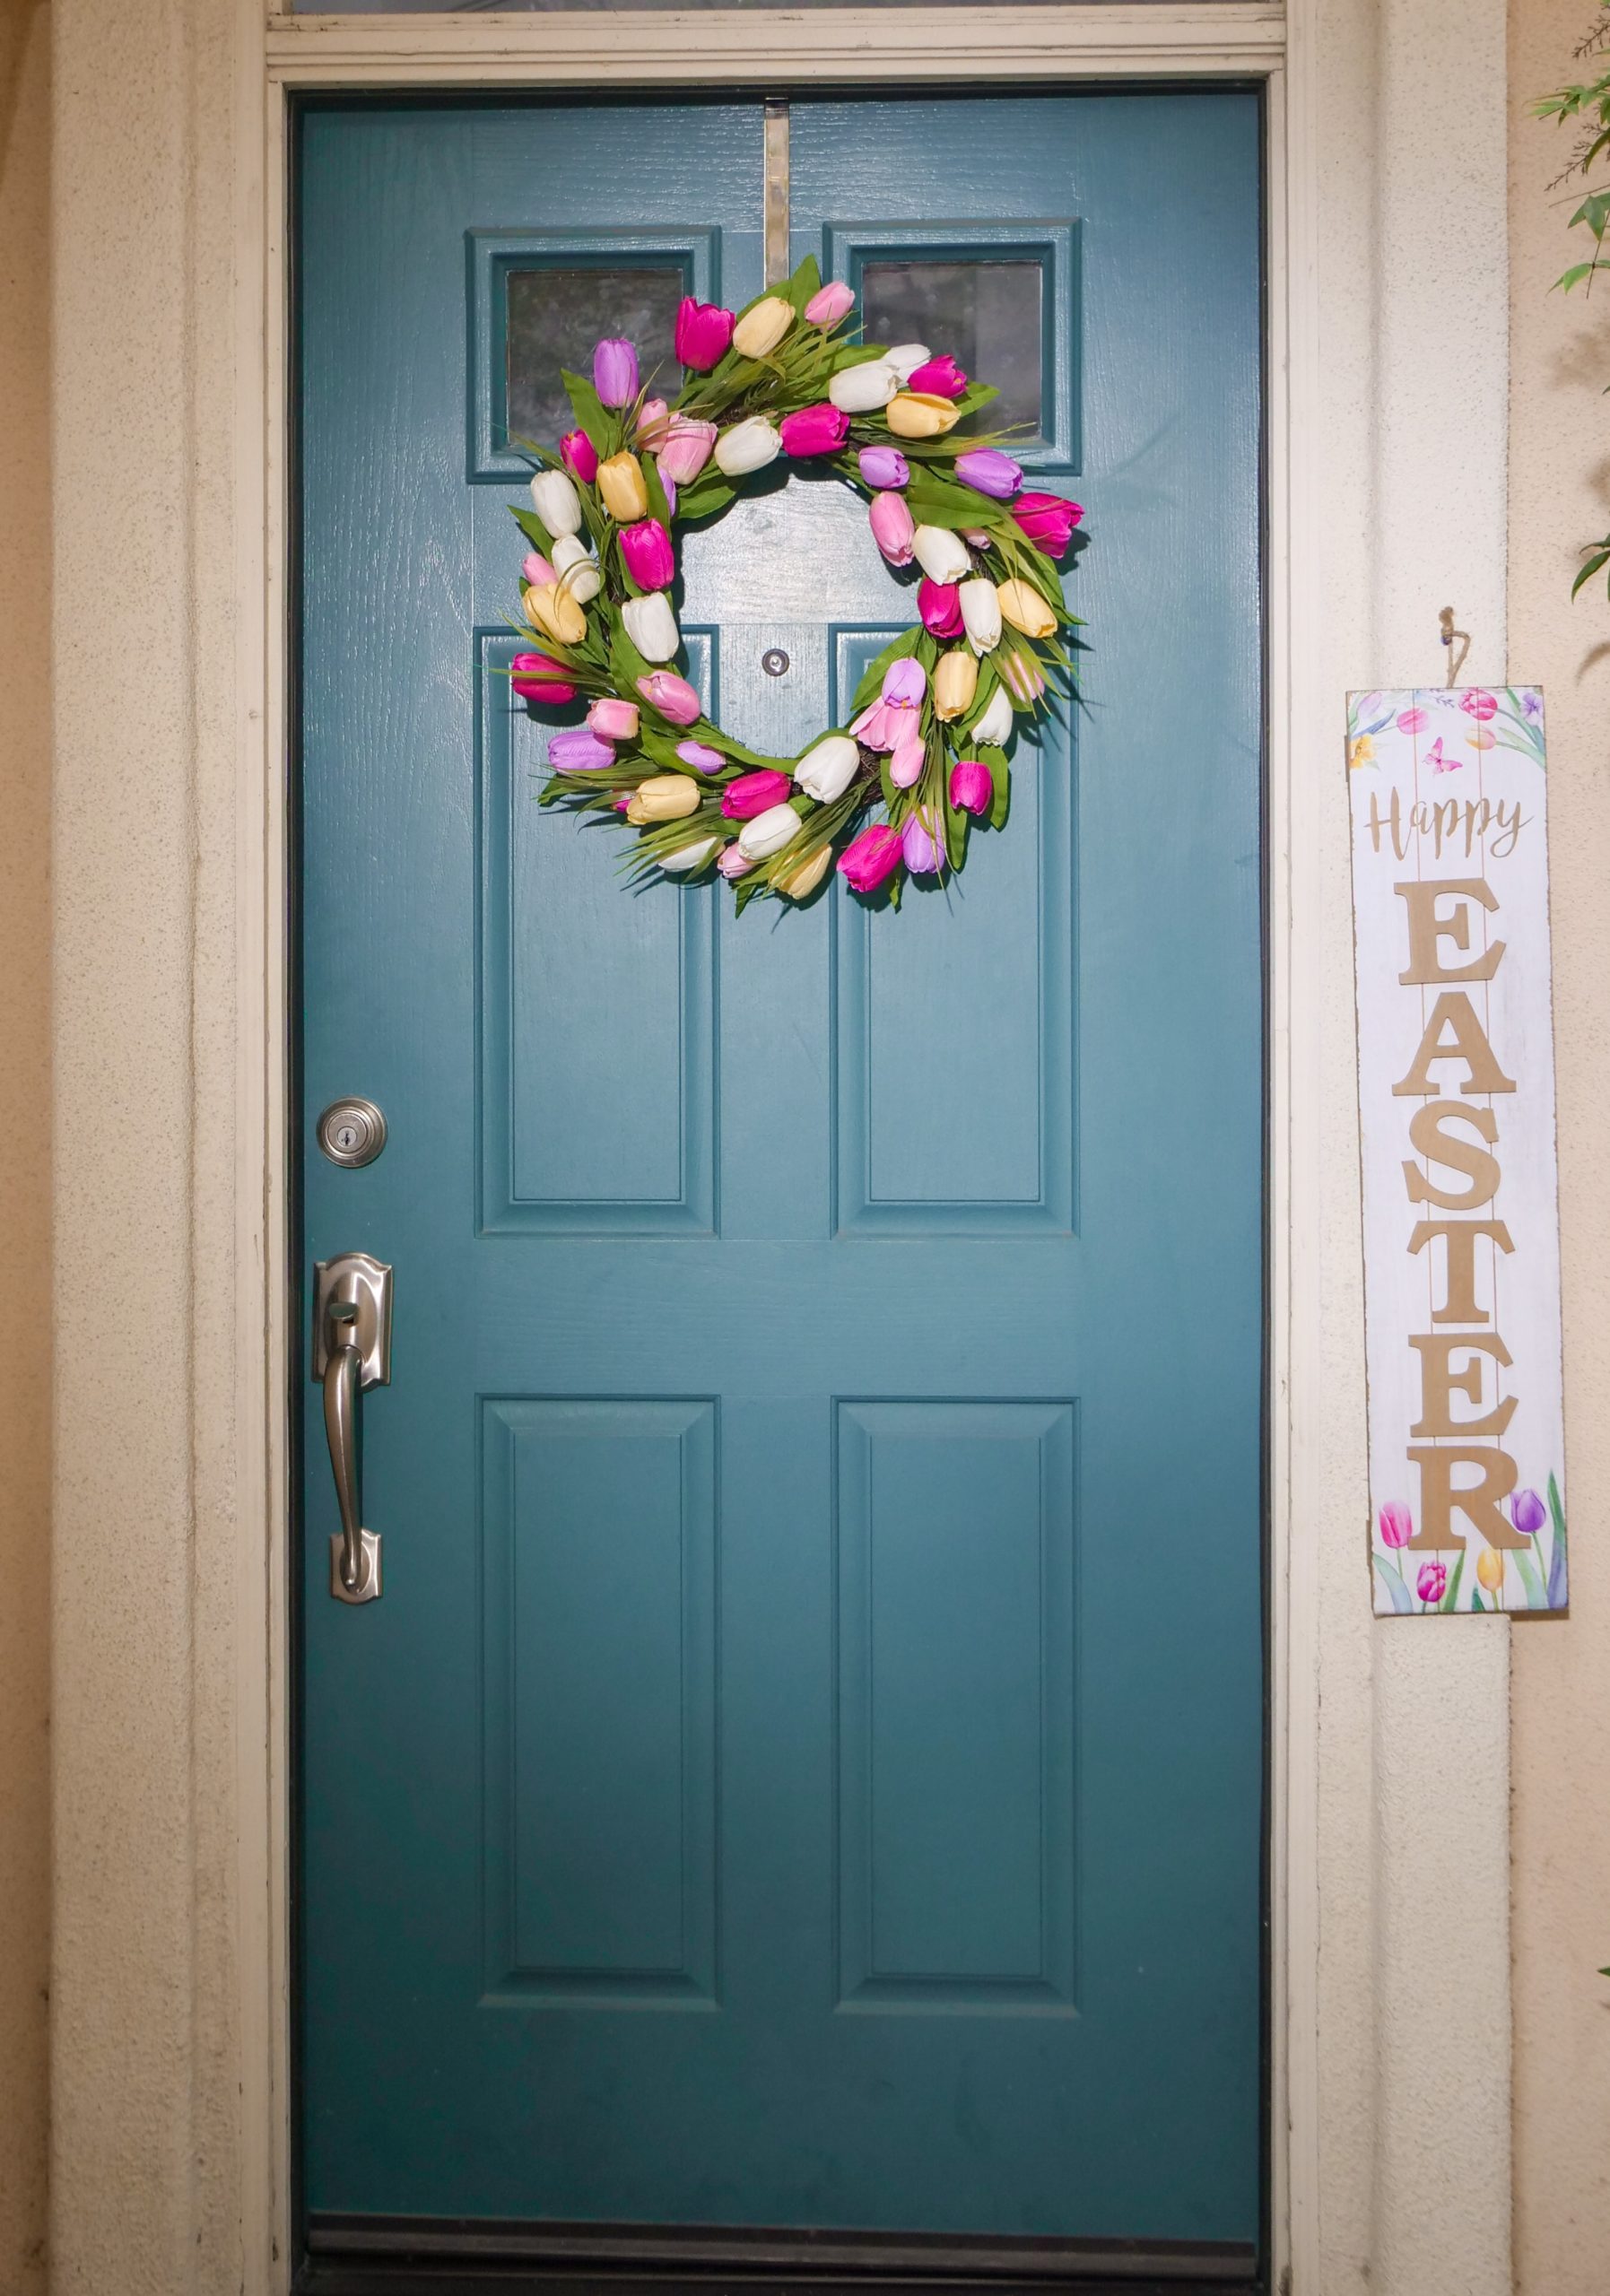 : Easter wreath made of tulips hanging on a wooden door with a Happy Easter sign on the side 